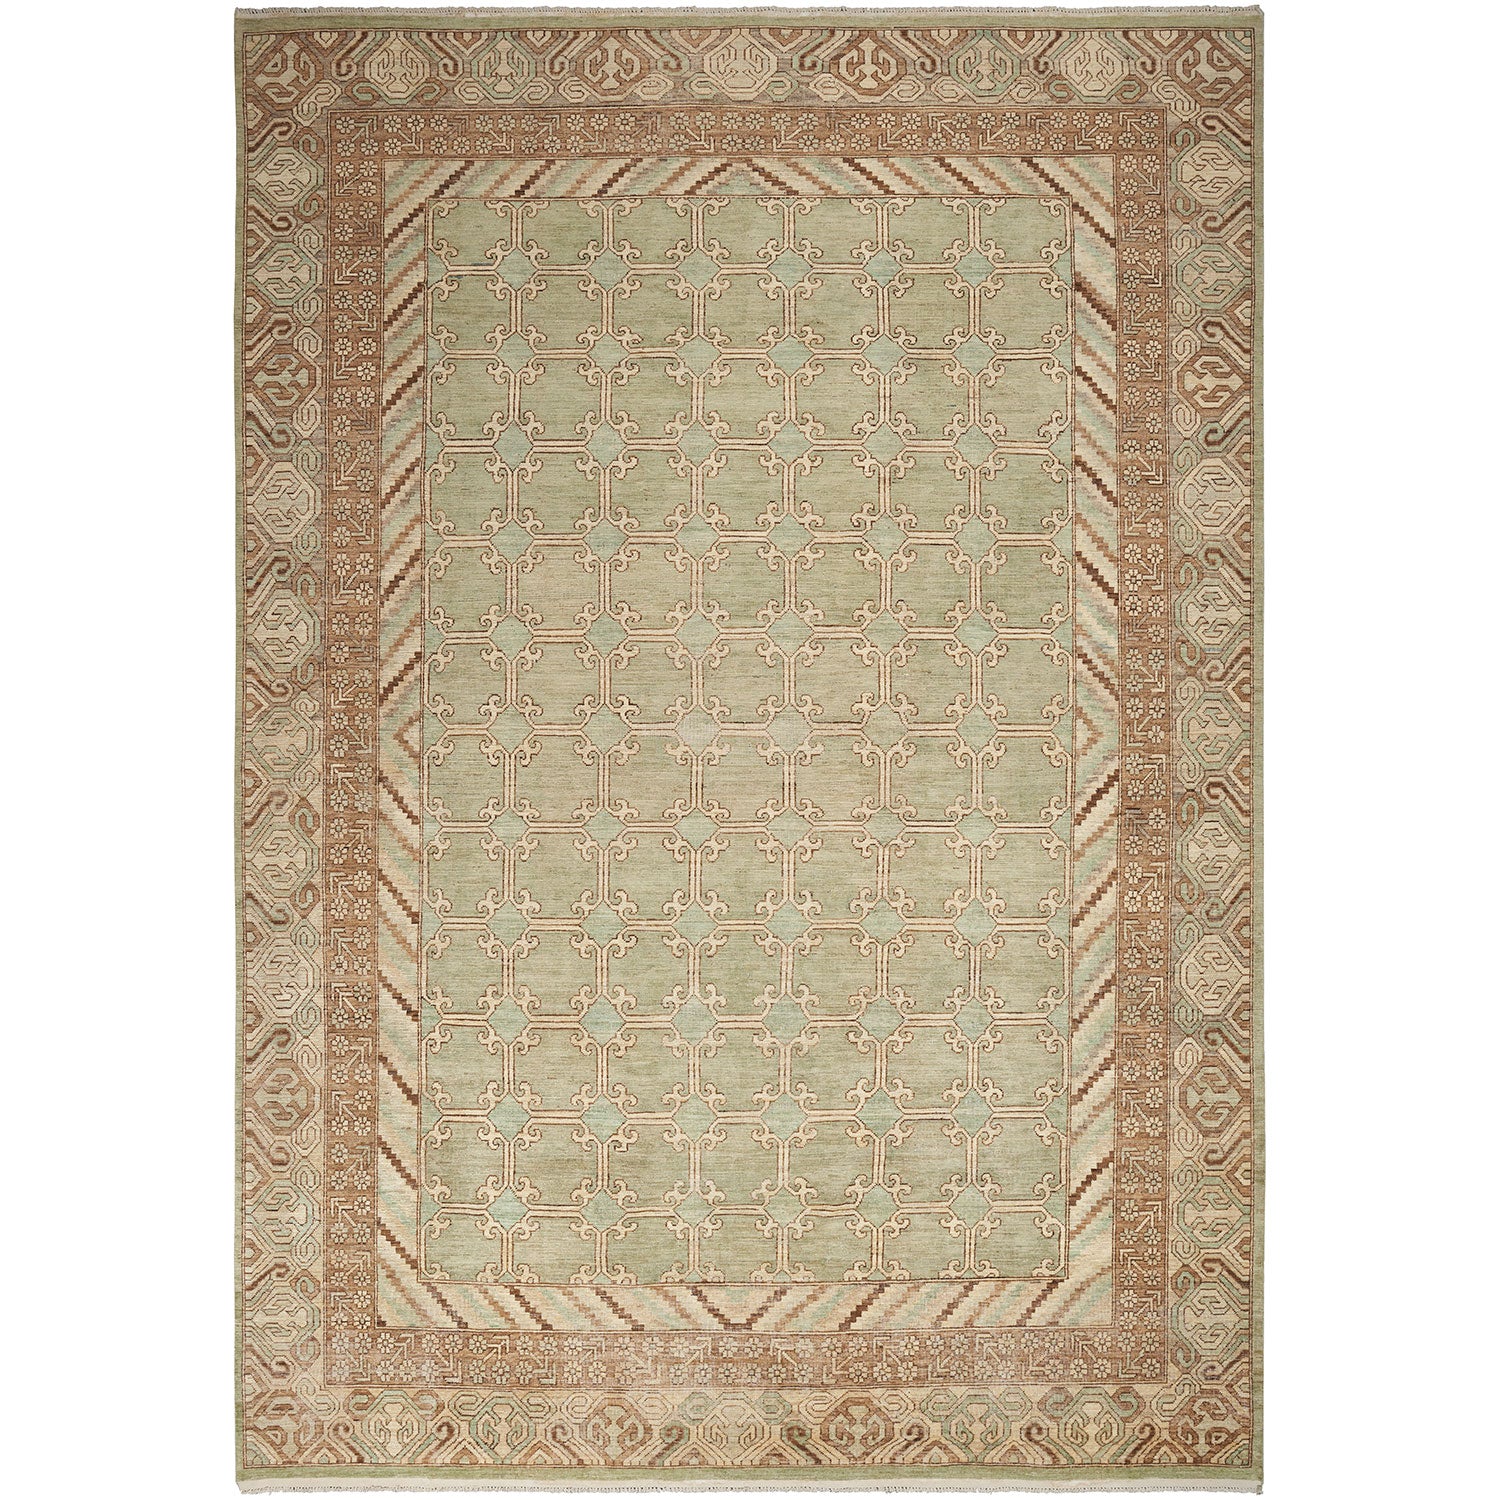 Traditional rectangular rug with ornamental design in muted green.